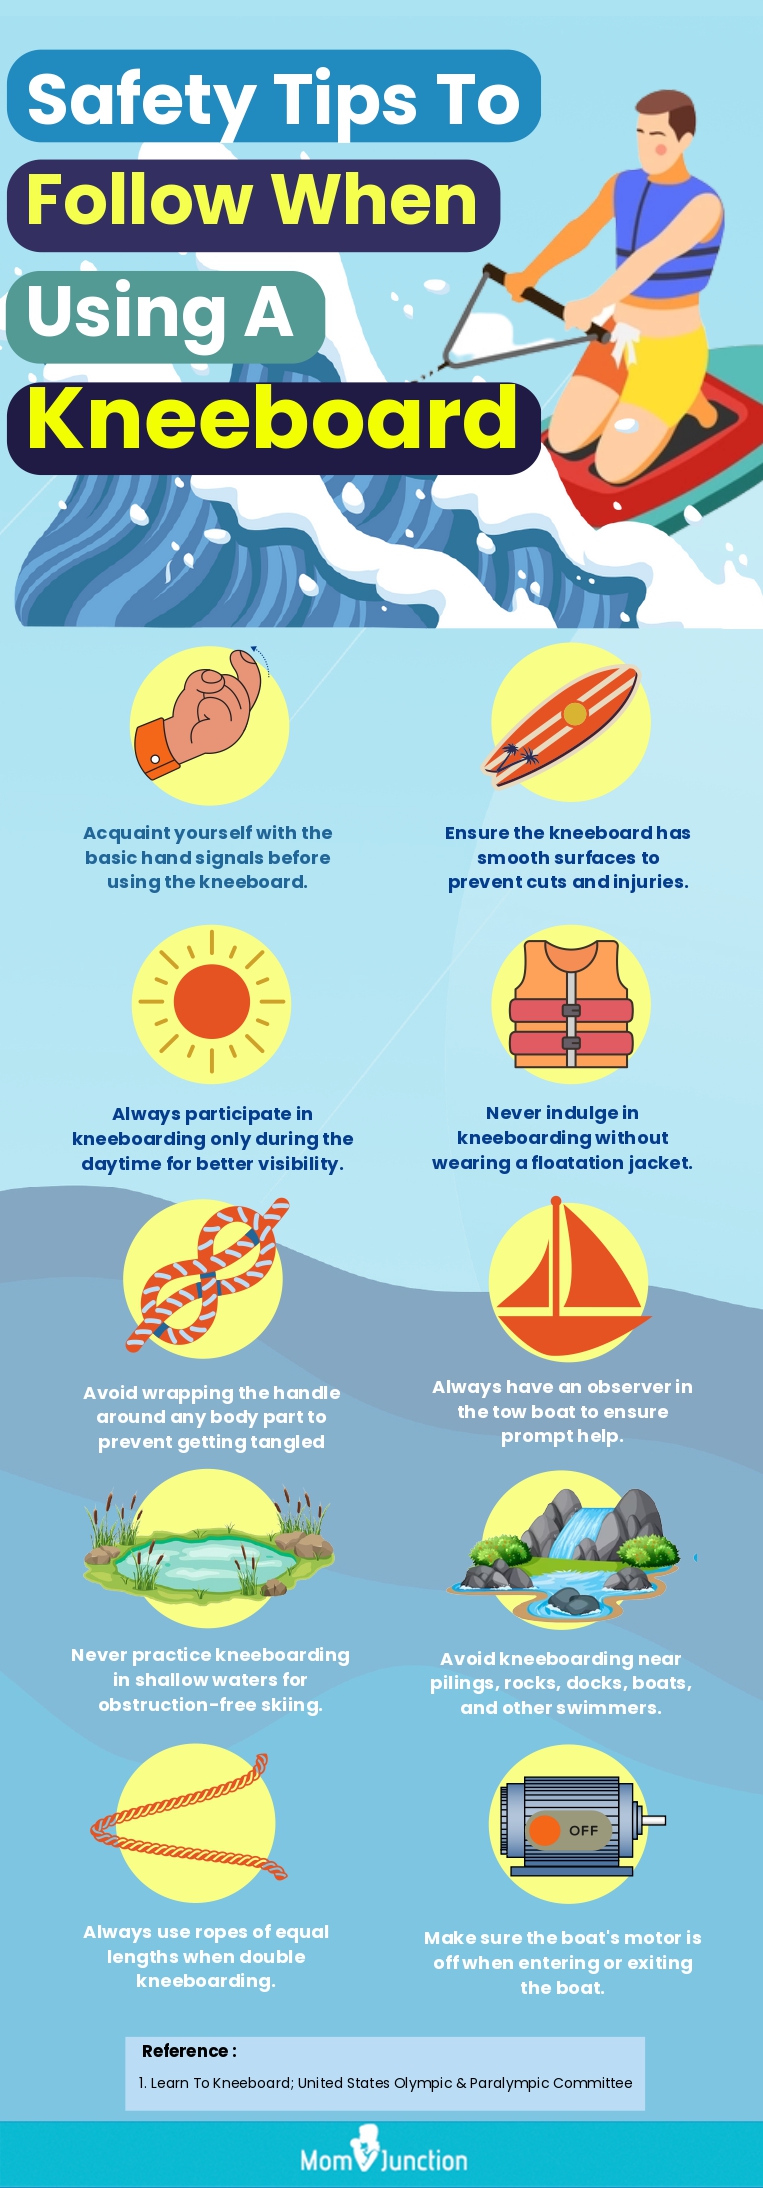 Safety Tips To Follow When Using A Kneeboard (infographic)